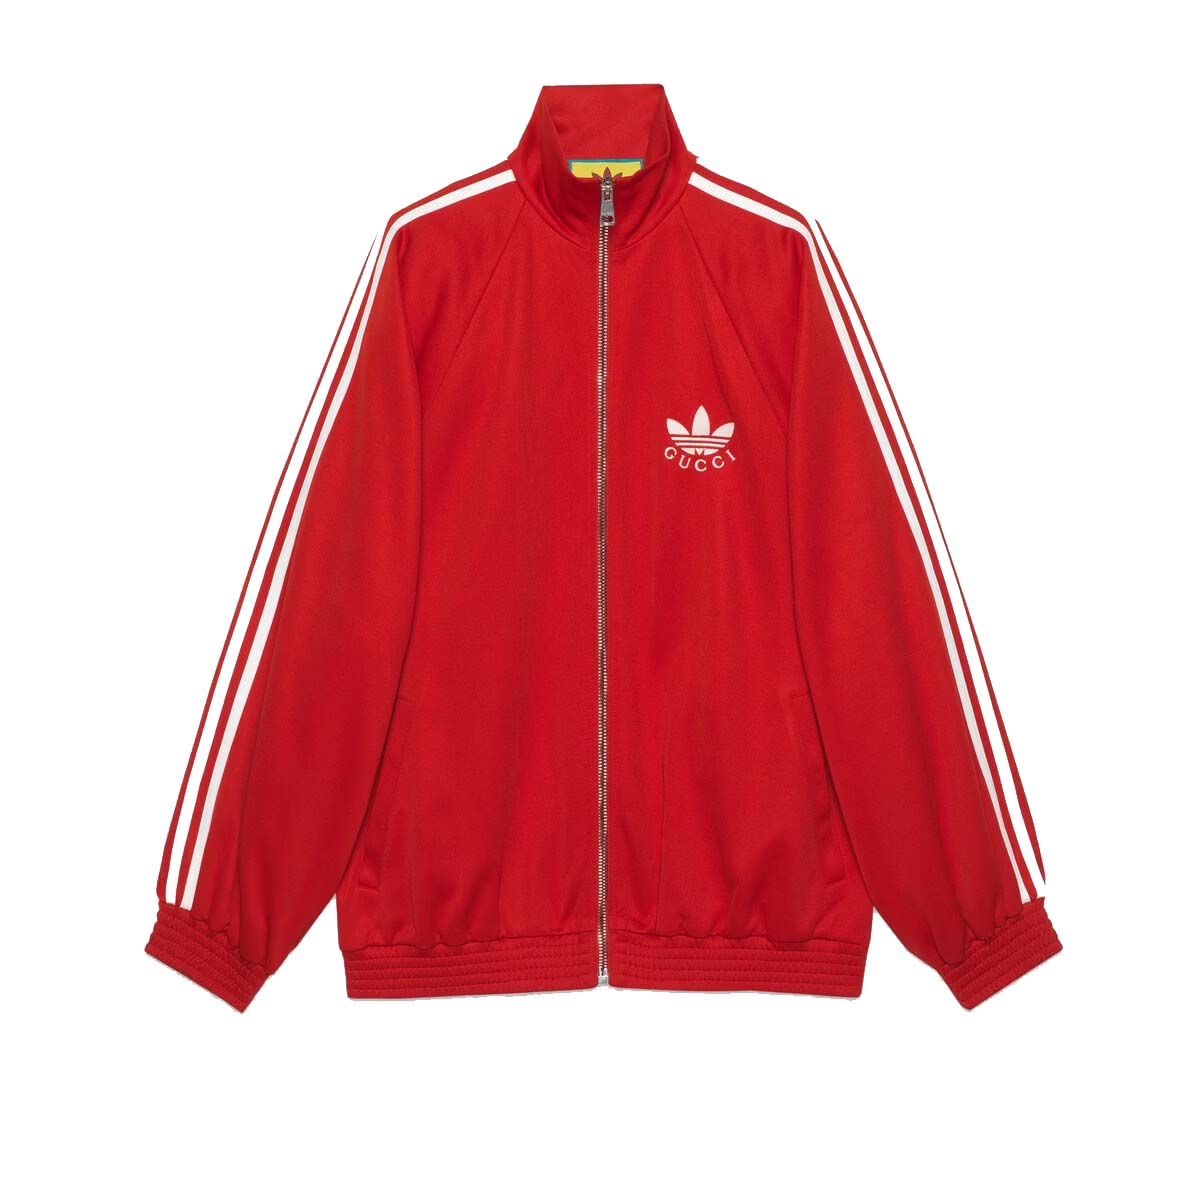 Gucci x adidas Cotton Jersey Zip Jacket Bright Red - FW22 - JP